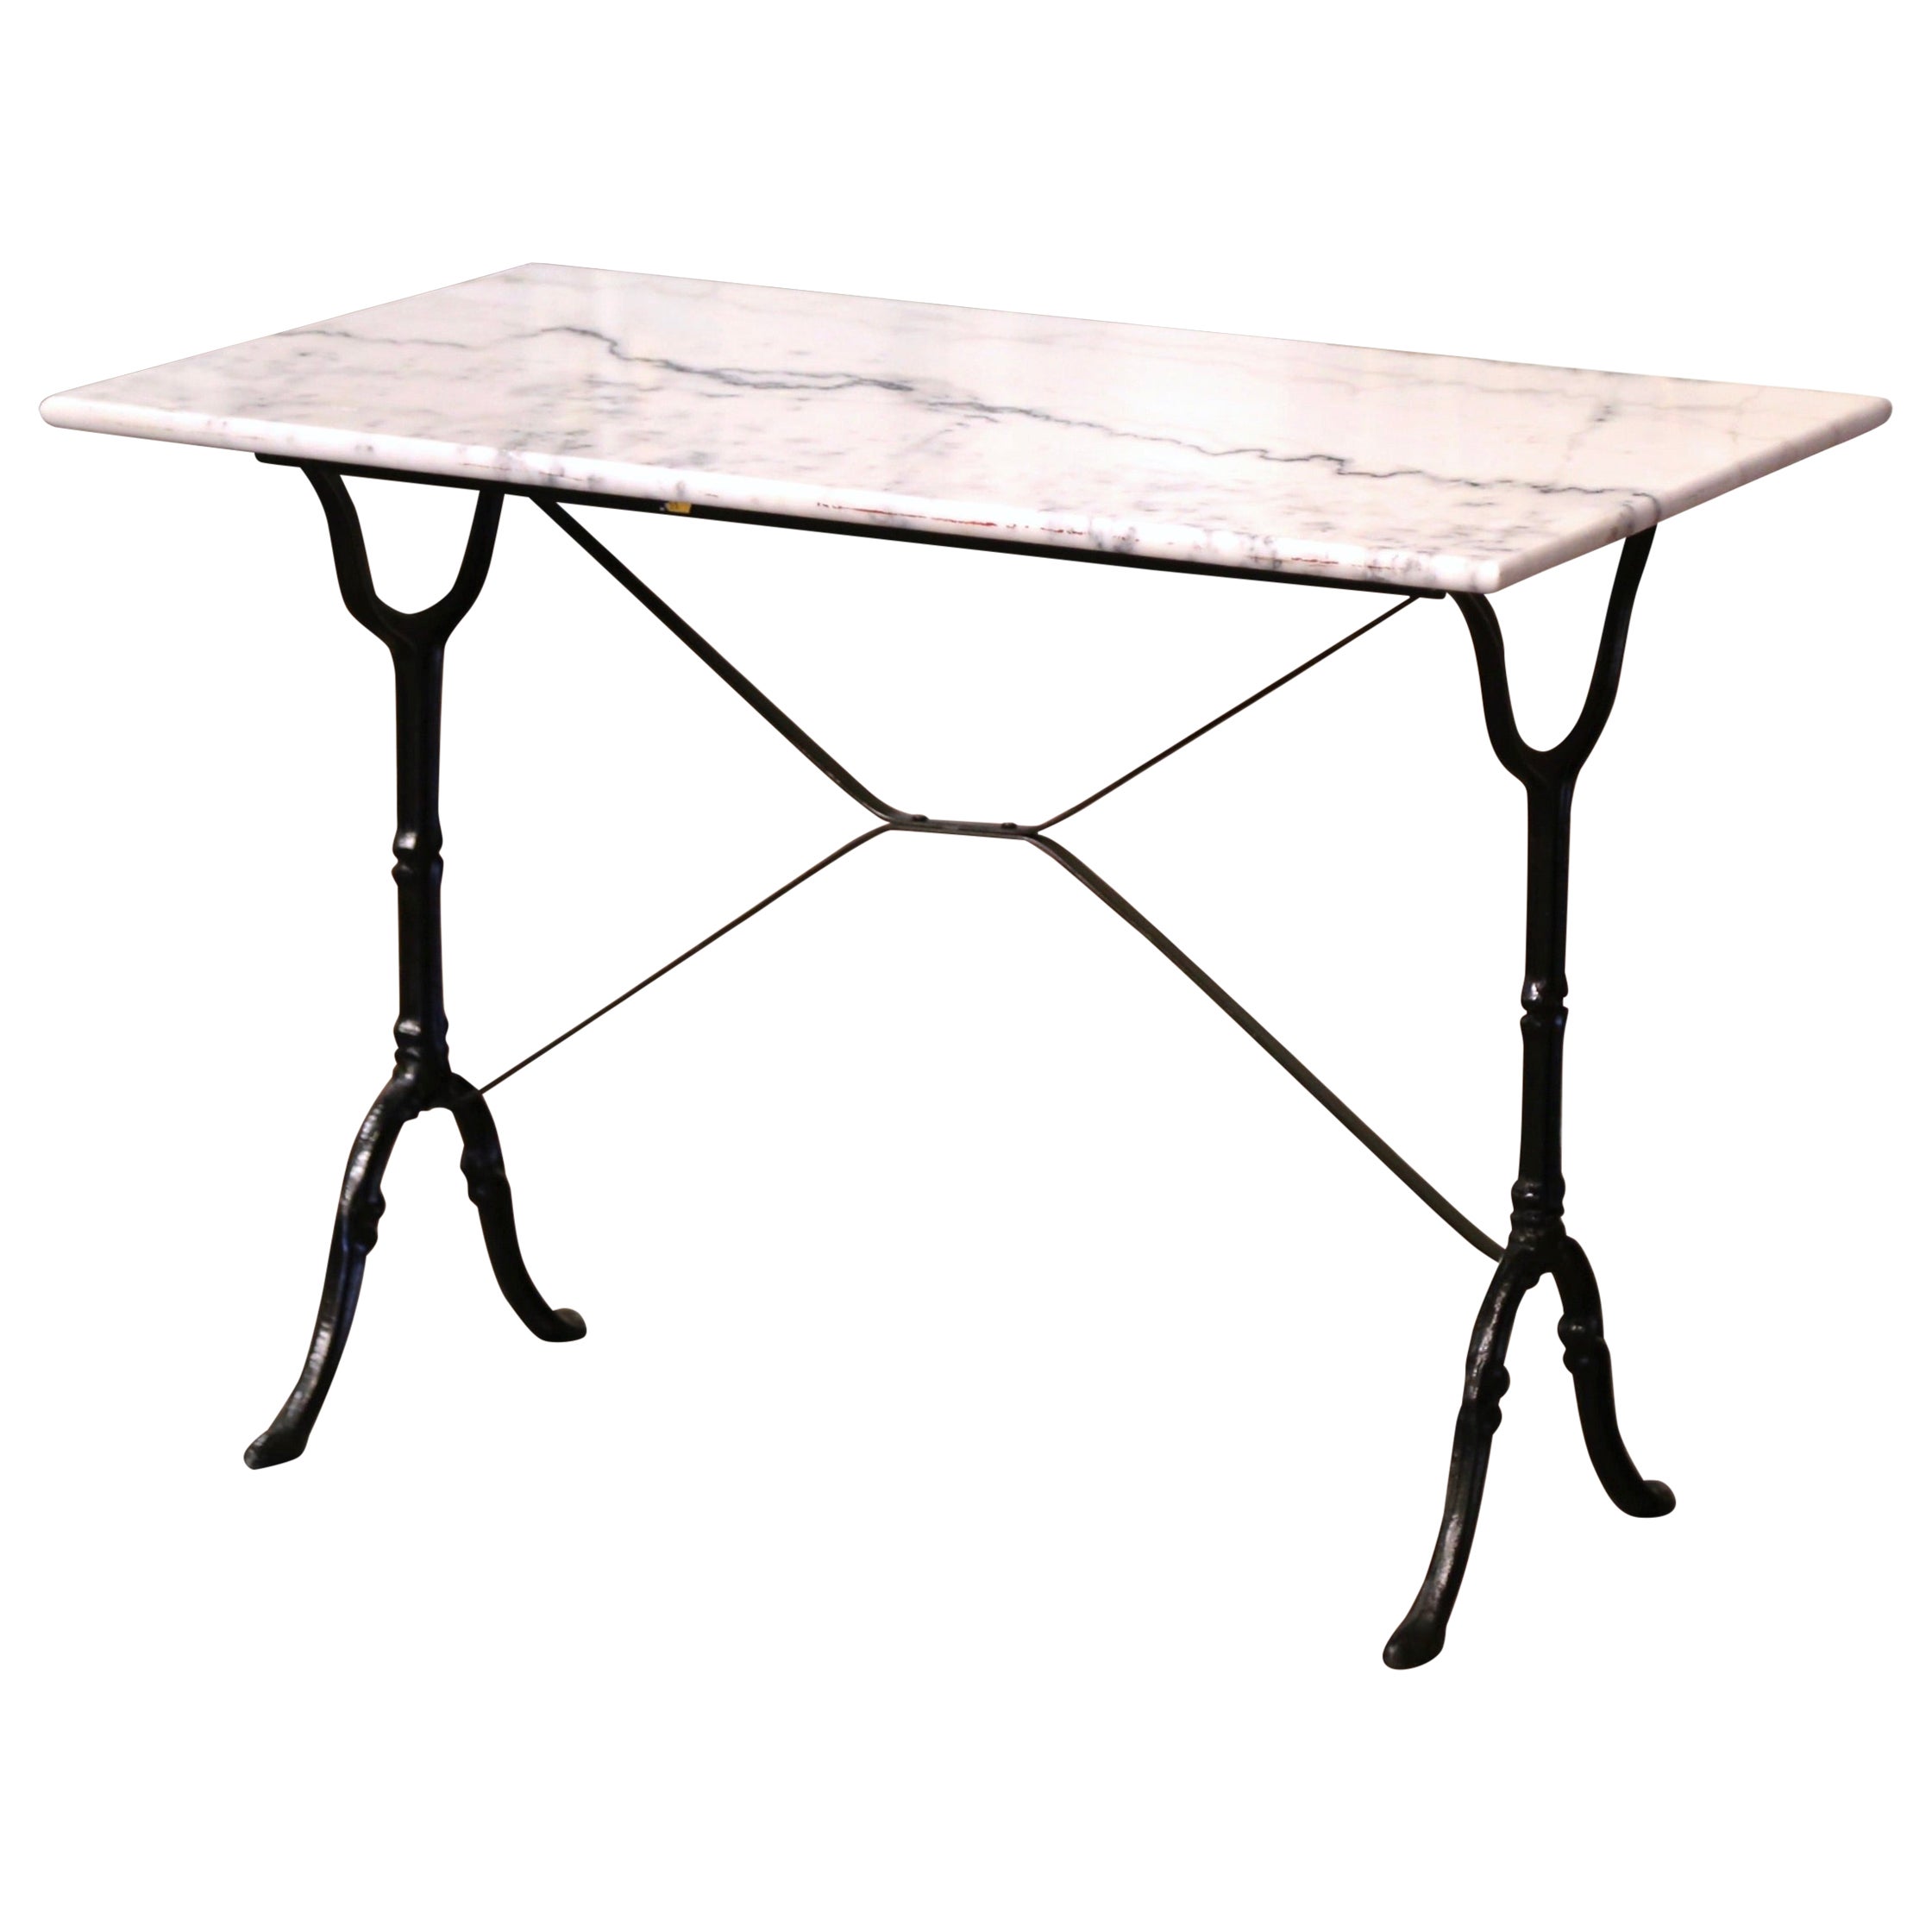 Early 20th Century French Marble Top Black Painted Iron Bistrot Table